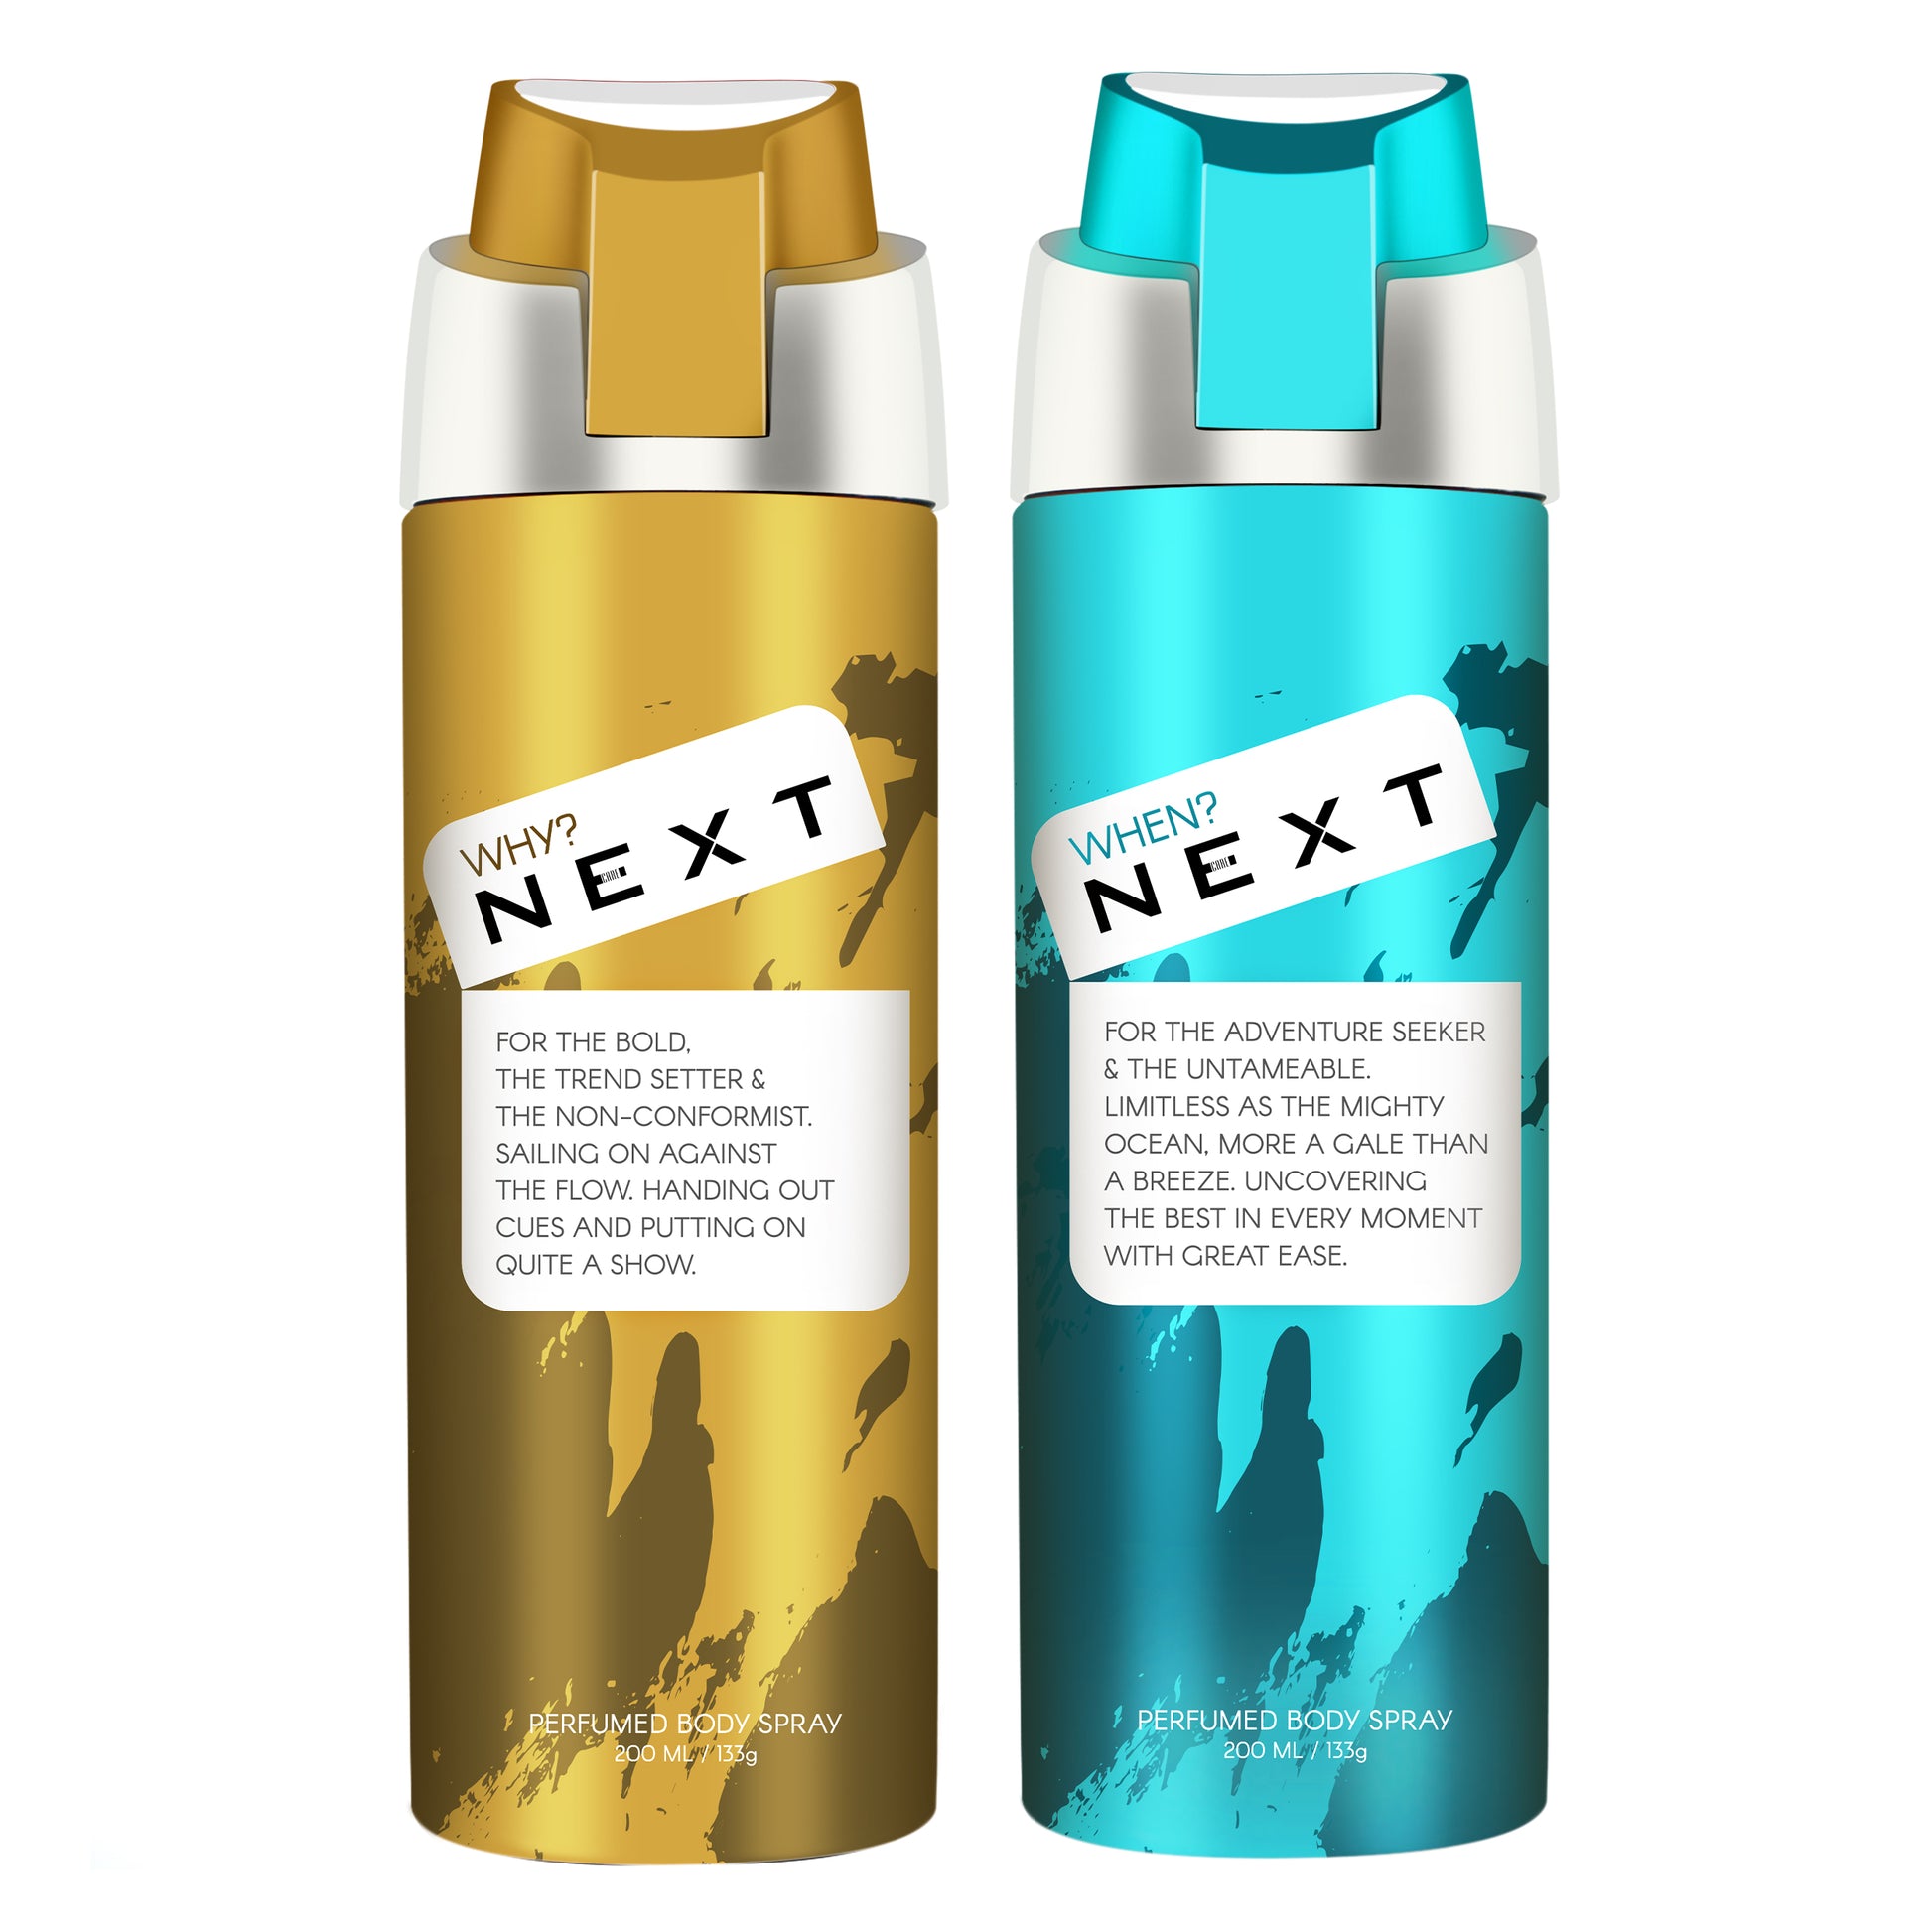 Combo Pack of 2 Next Perfumed Body Spray- Why ? & When ? - 2 x 200 ML - For Men and Women